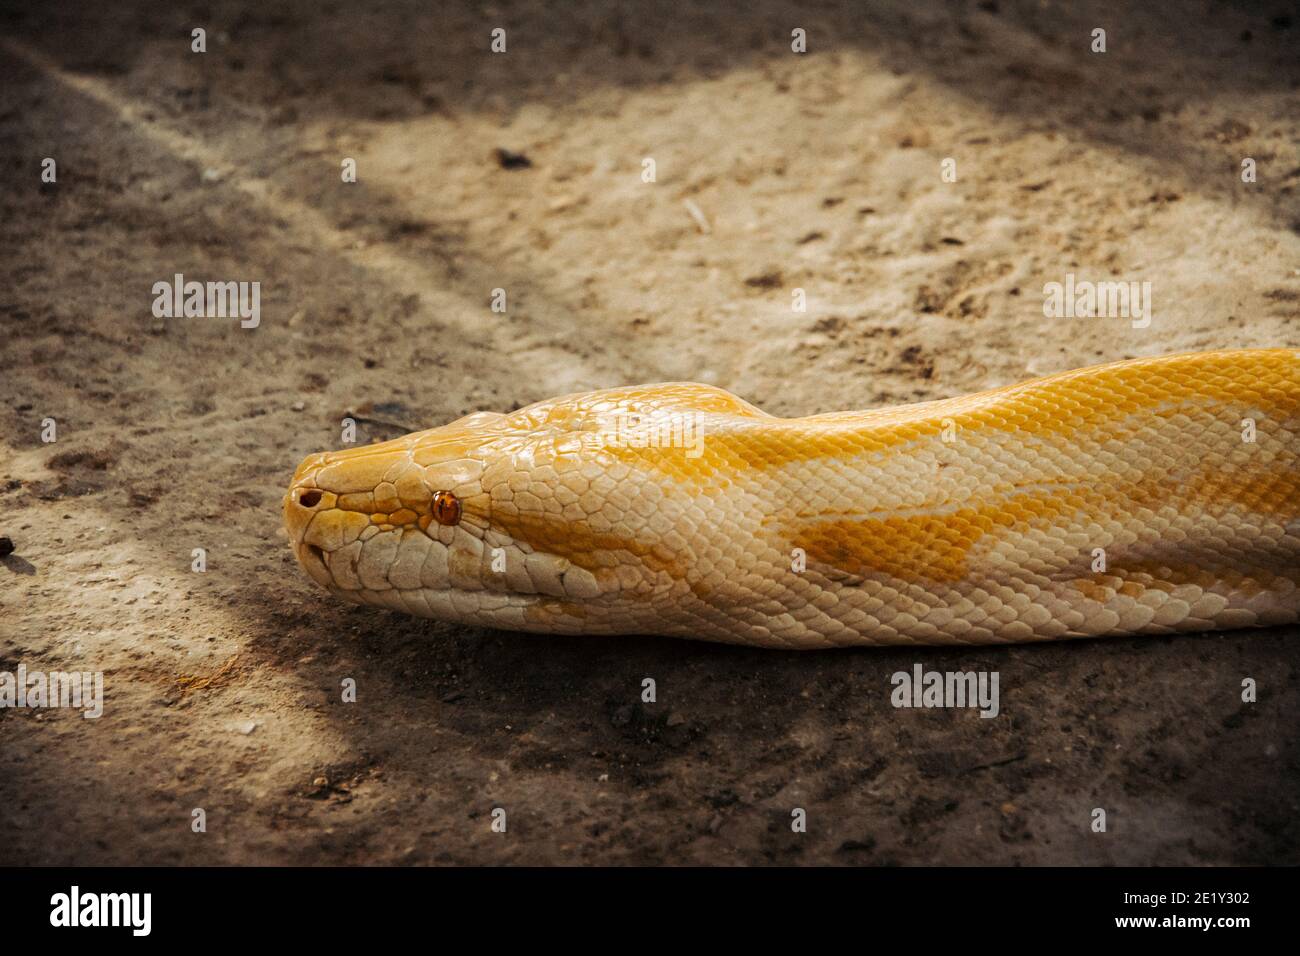 Head of an albino phyton snake moving across the ground Stock Photo